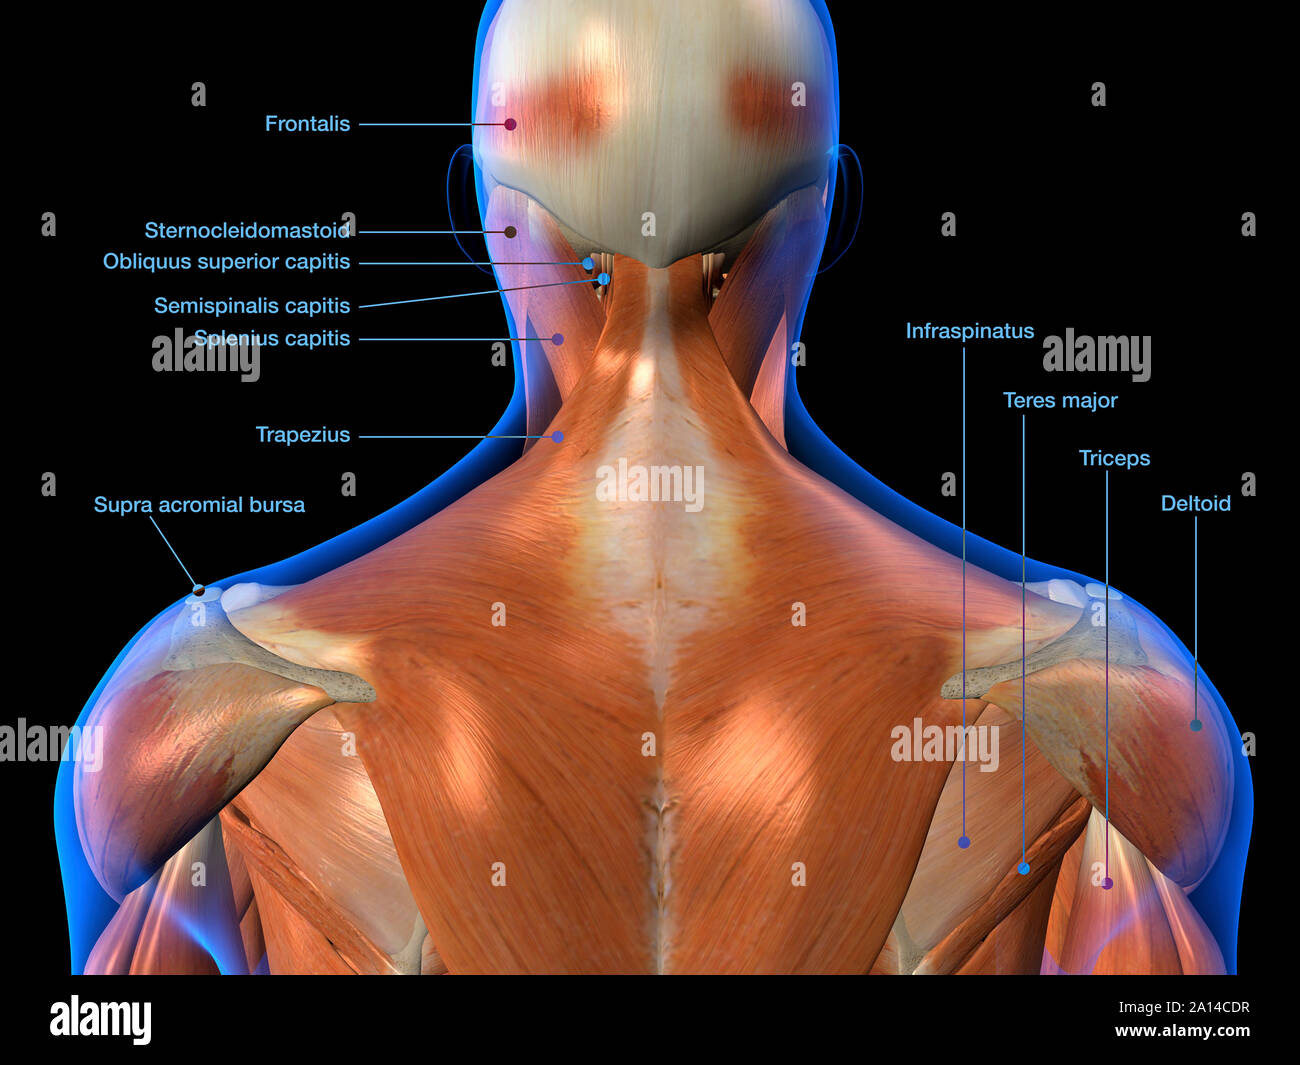 Labeled anatomy chart of neck and back muscles on black background. Stock Photo